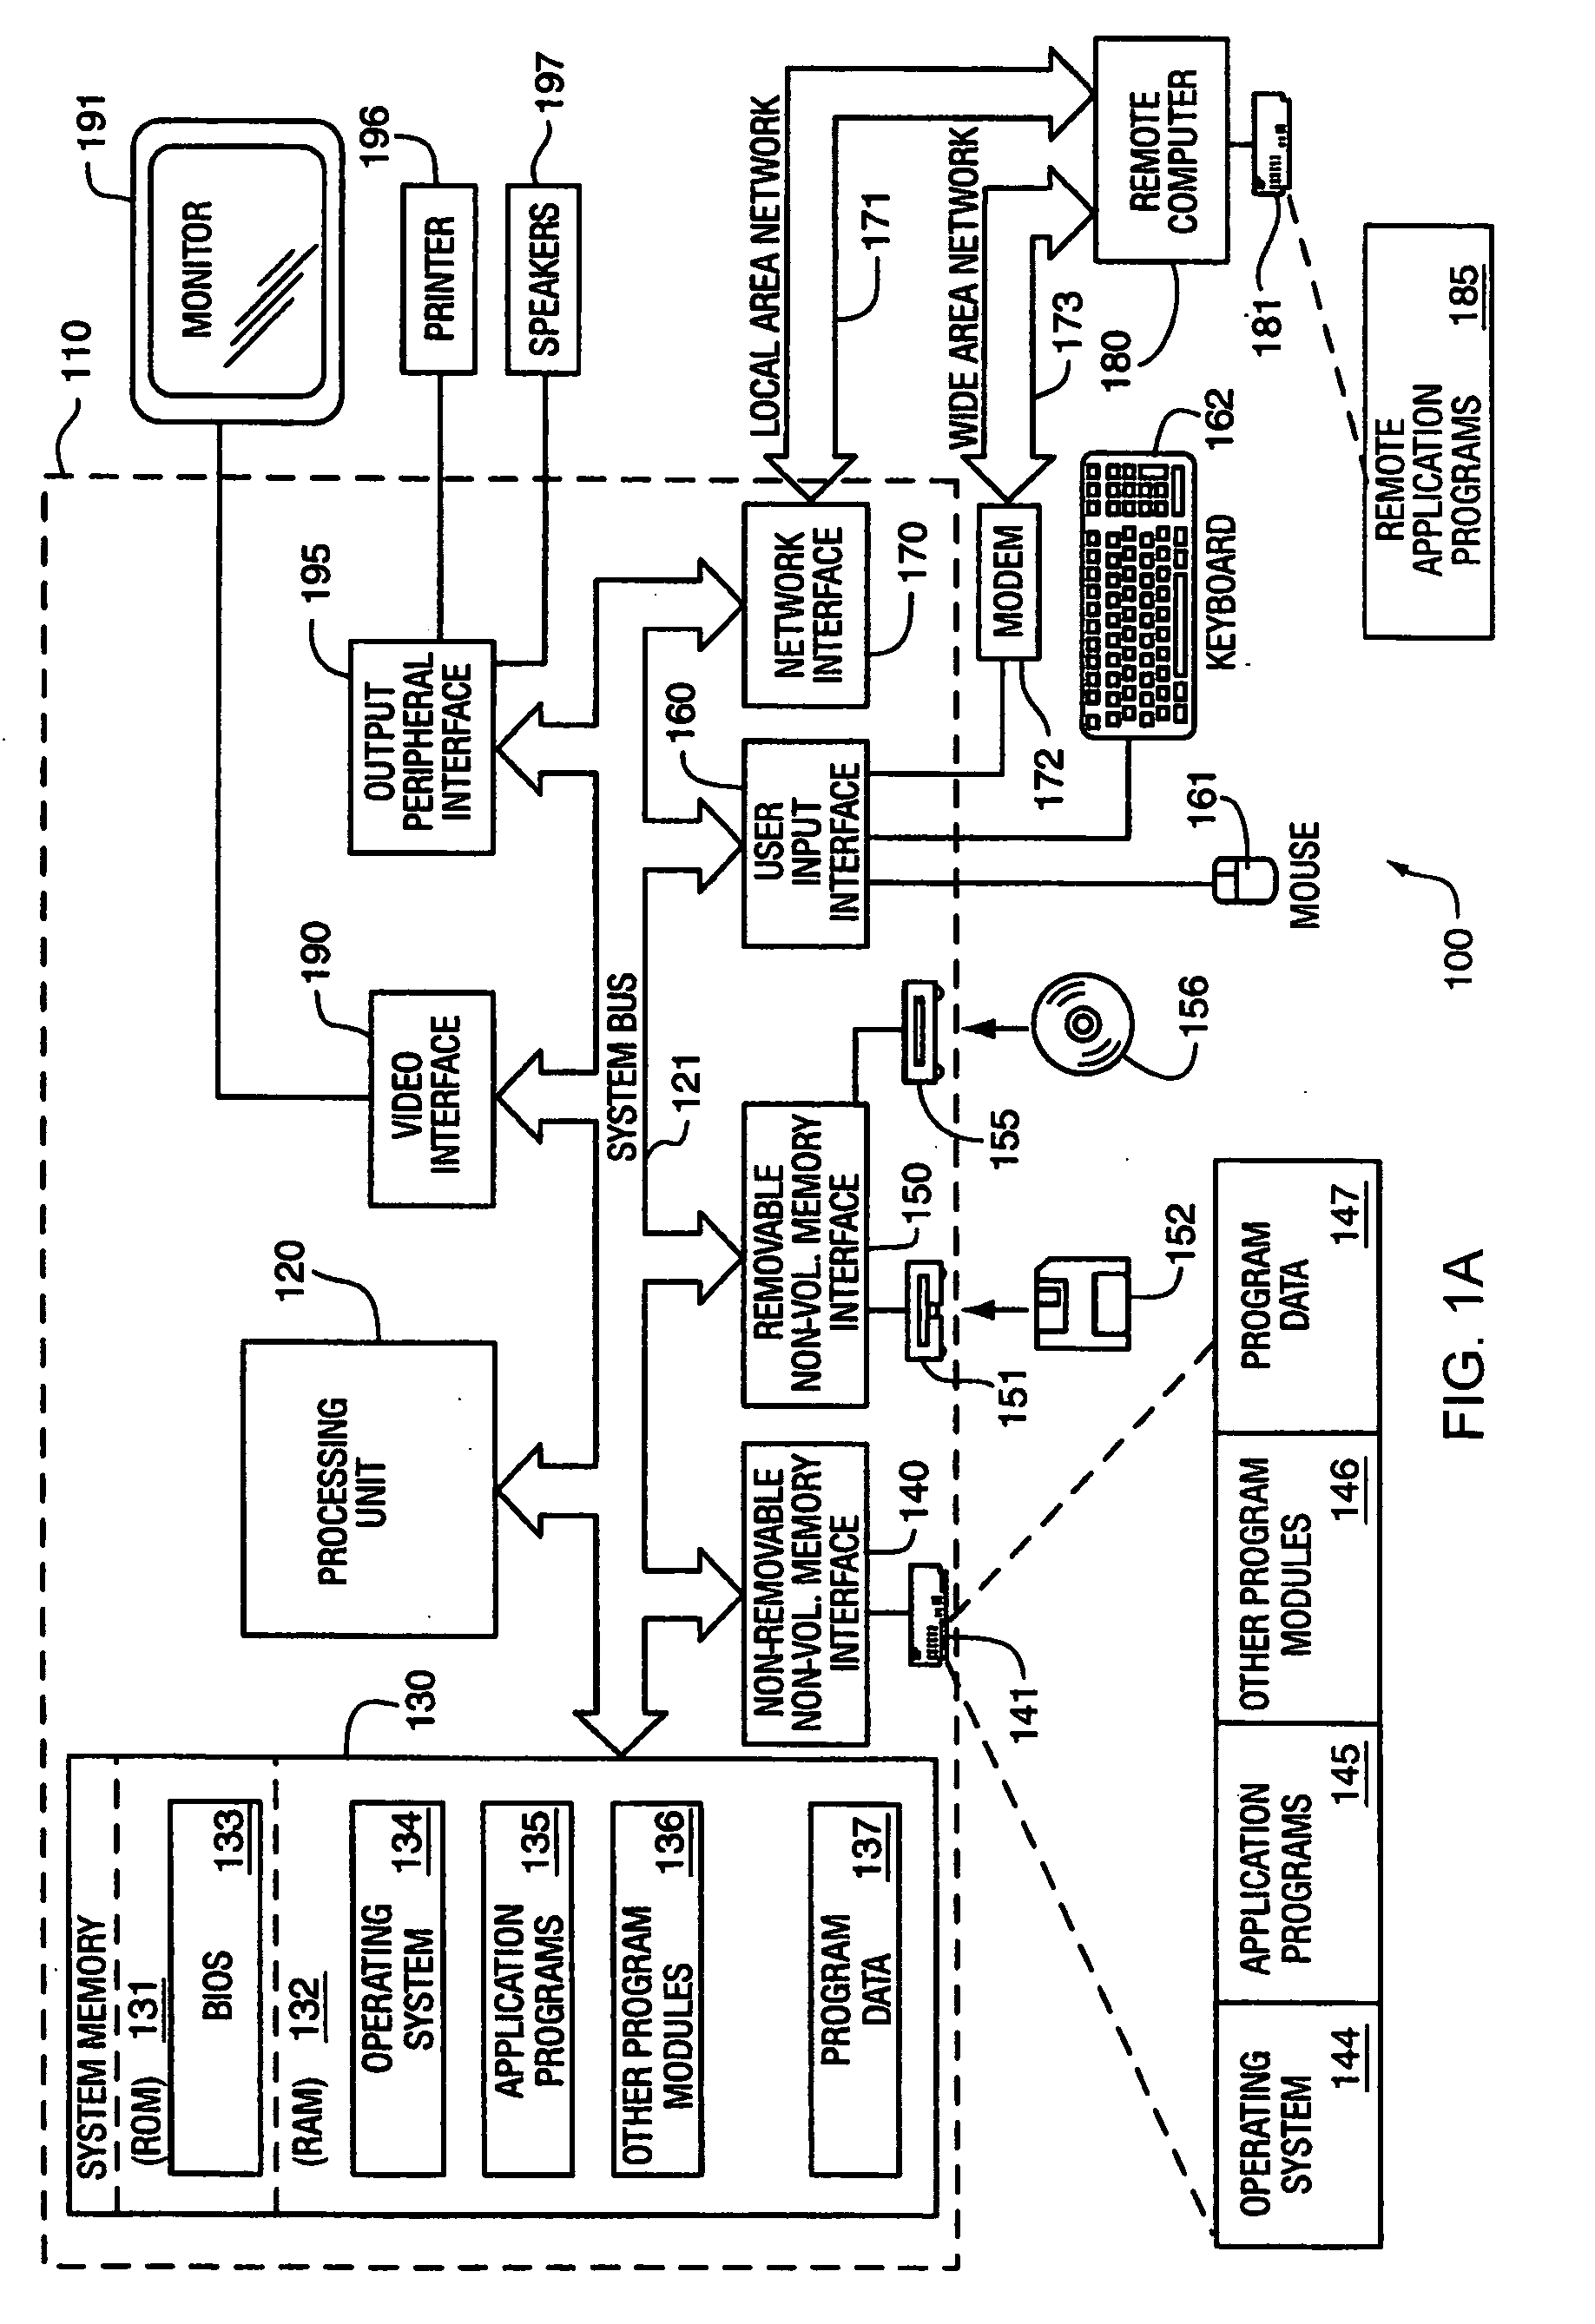 Method and system of taskbar button interfaces